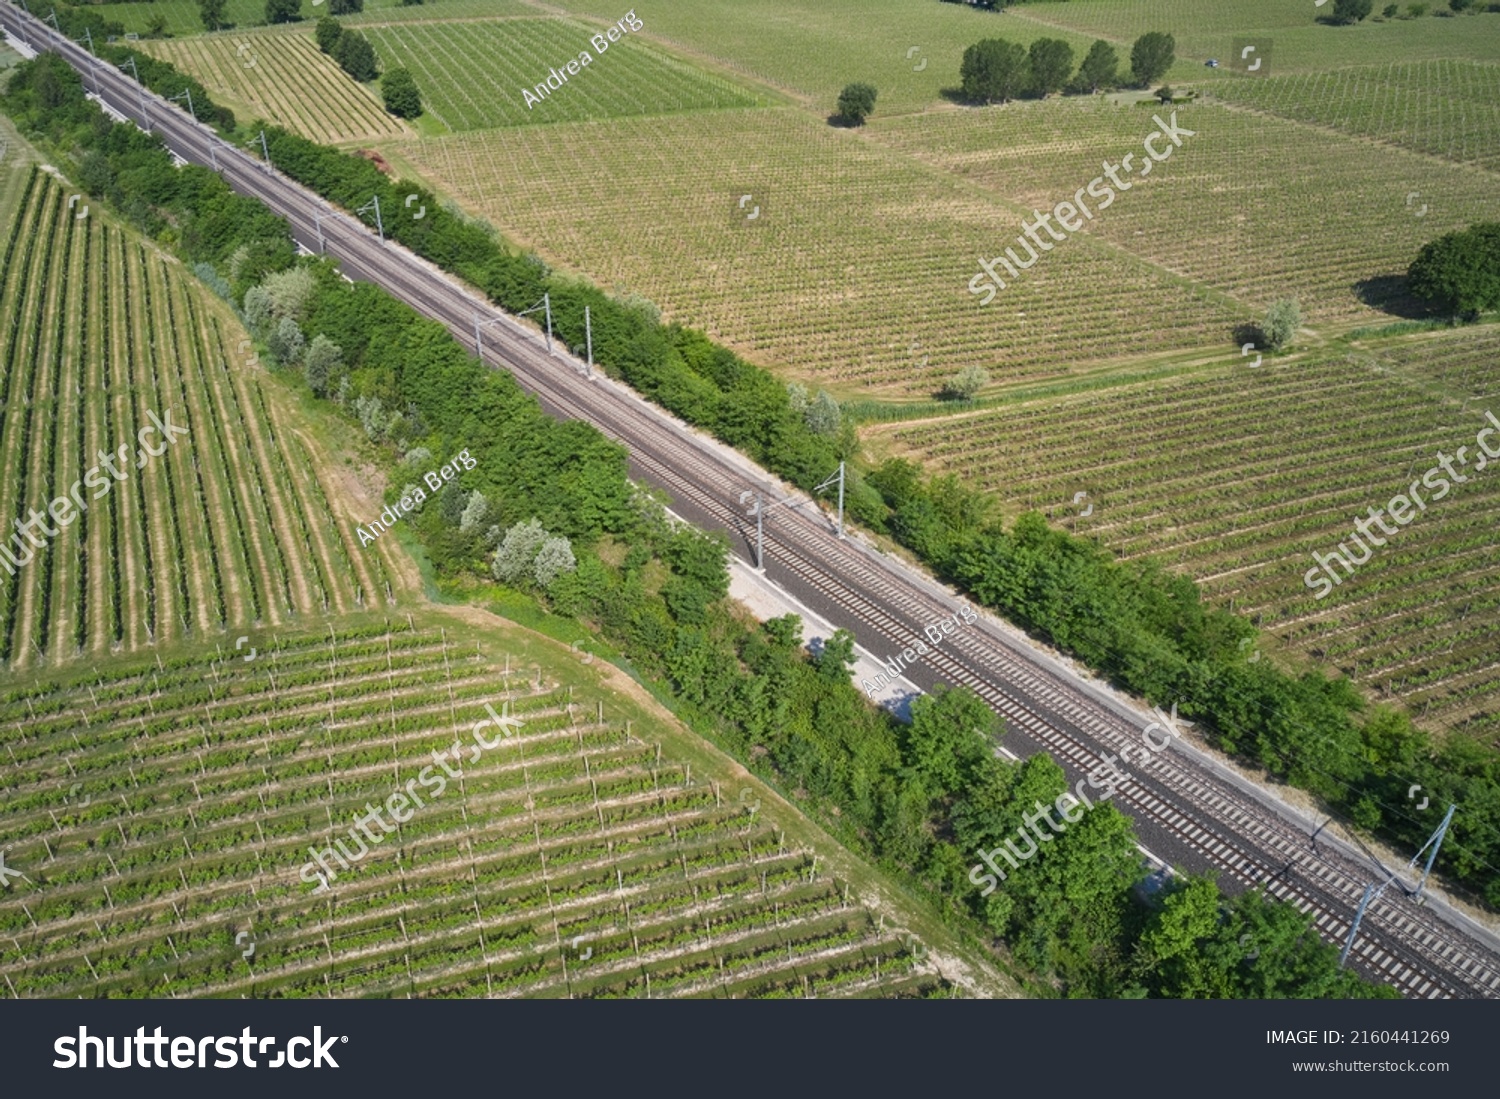 Transportation railway in Italy drone view. Railroad between vineyards diagonally aerial view. #2160441269